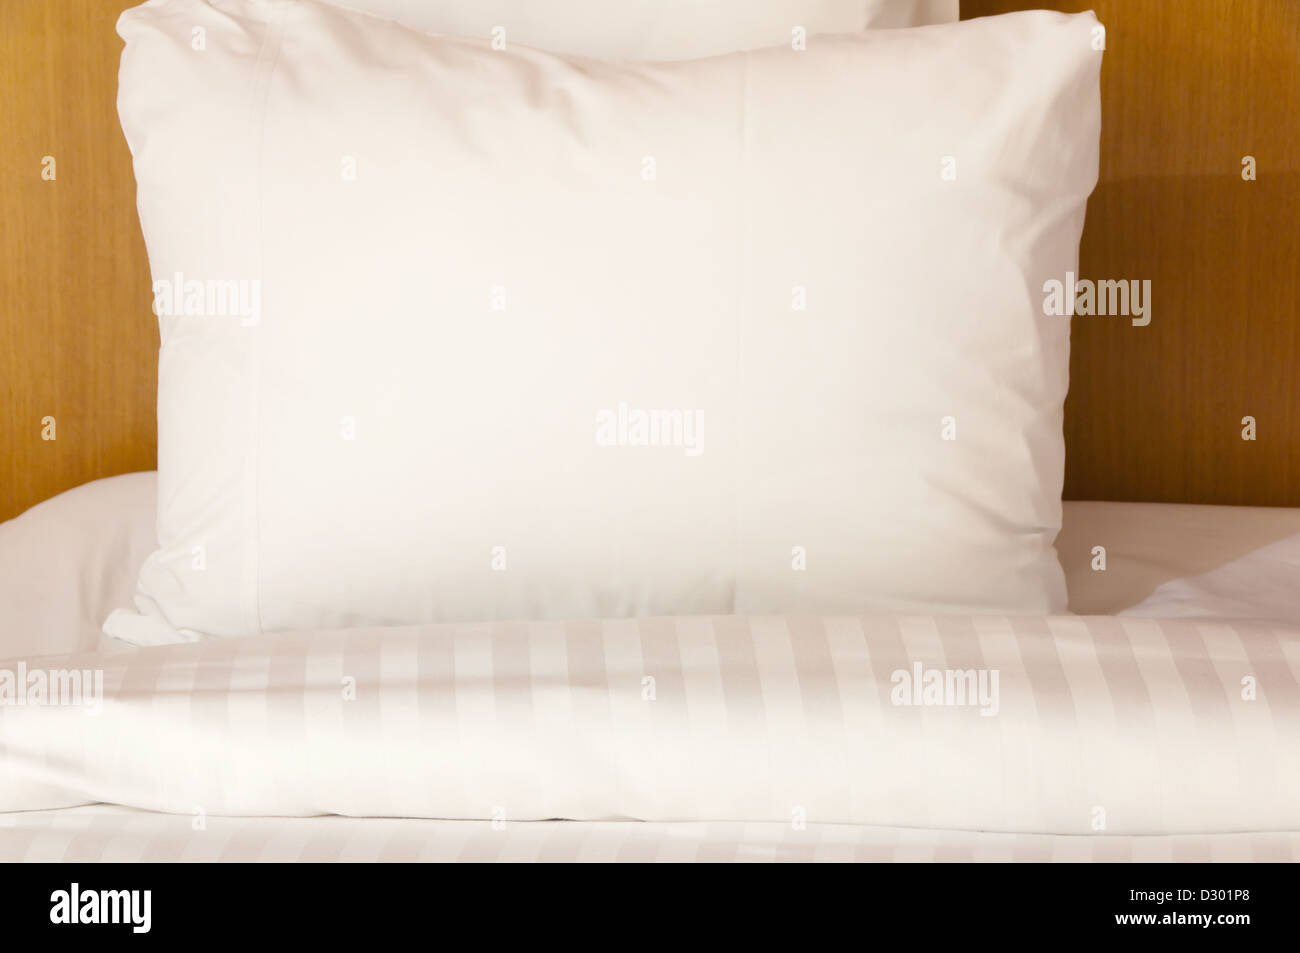 https://c8.alamy.com/comp/D301P8/white-pillow-and-blanket-on-a-hotel-bad-D301P8.jpg